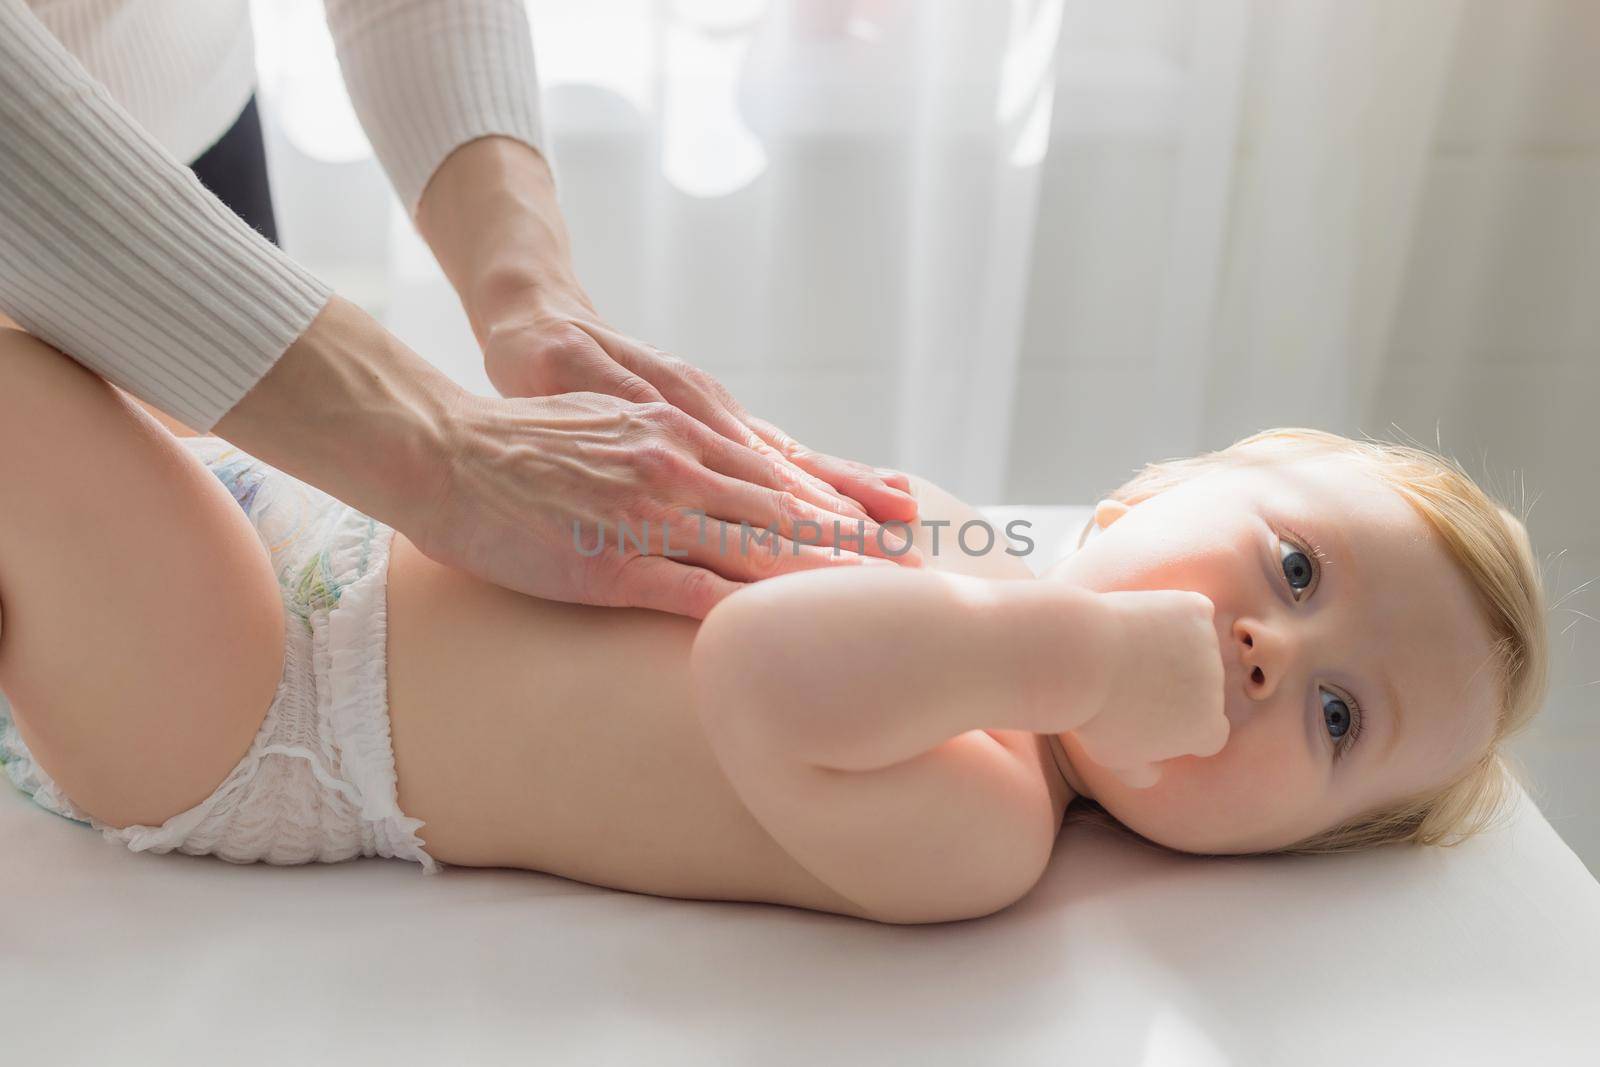 Mom gives her baby a tummy massage. Close-up. by Yurich32